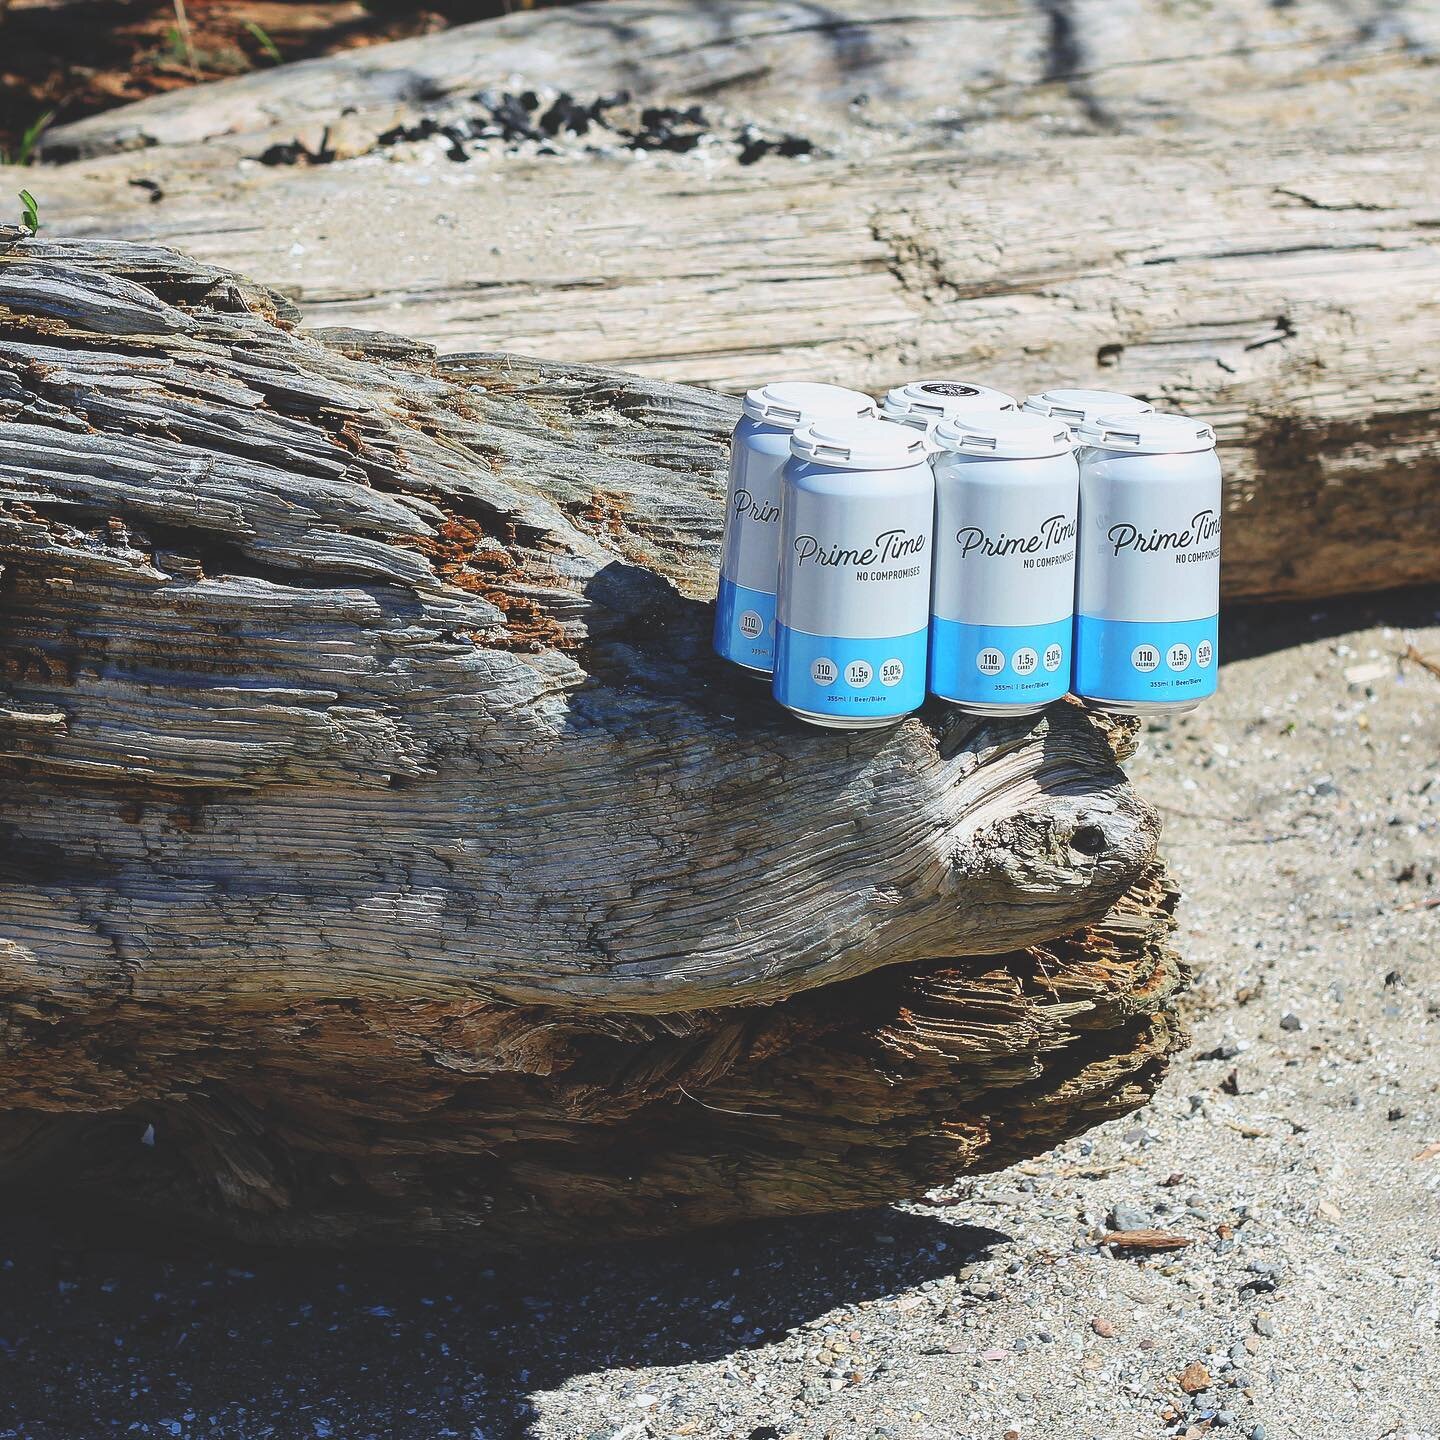 It&rsquo;s #thirstythursday!

Time to grab a 6pack and enjoy the sunshine!